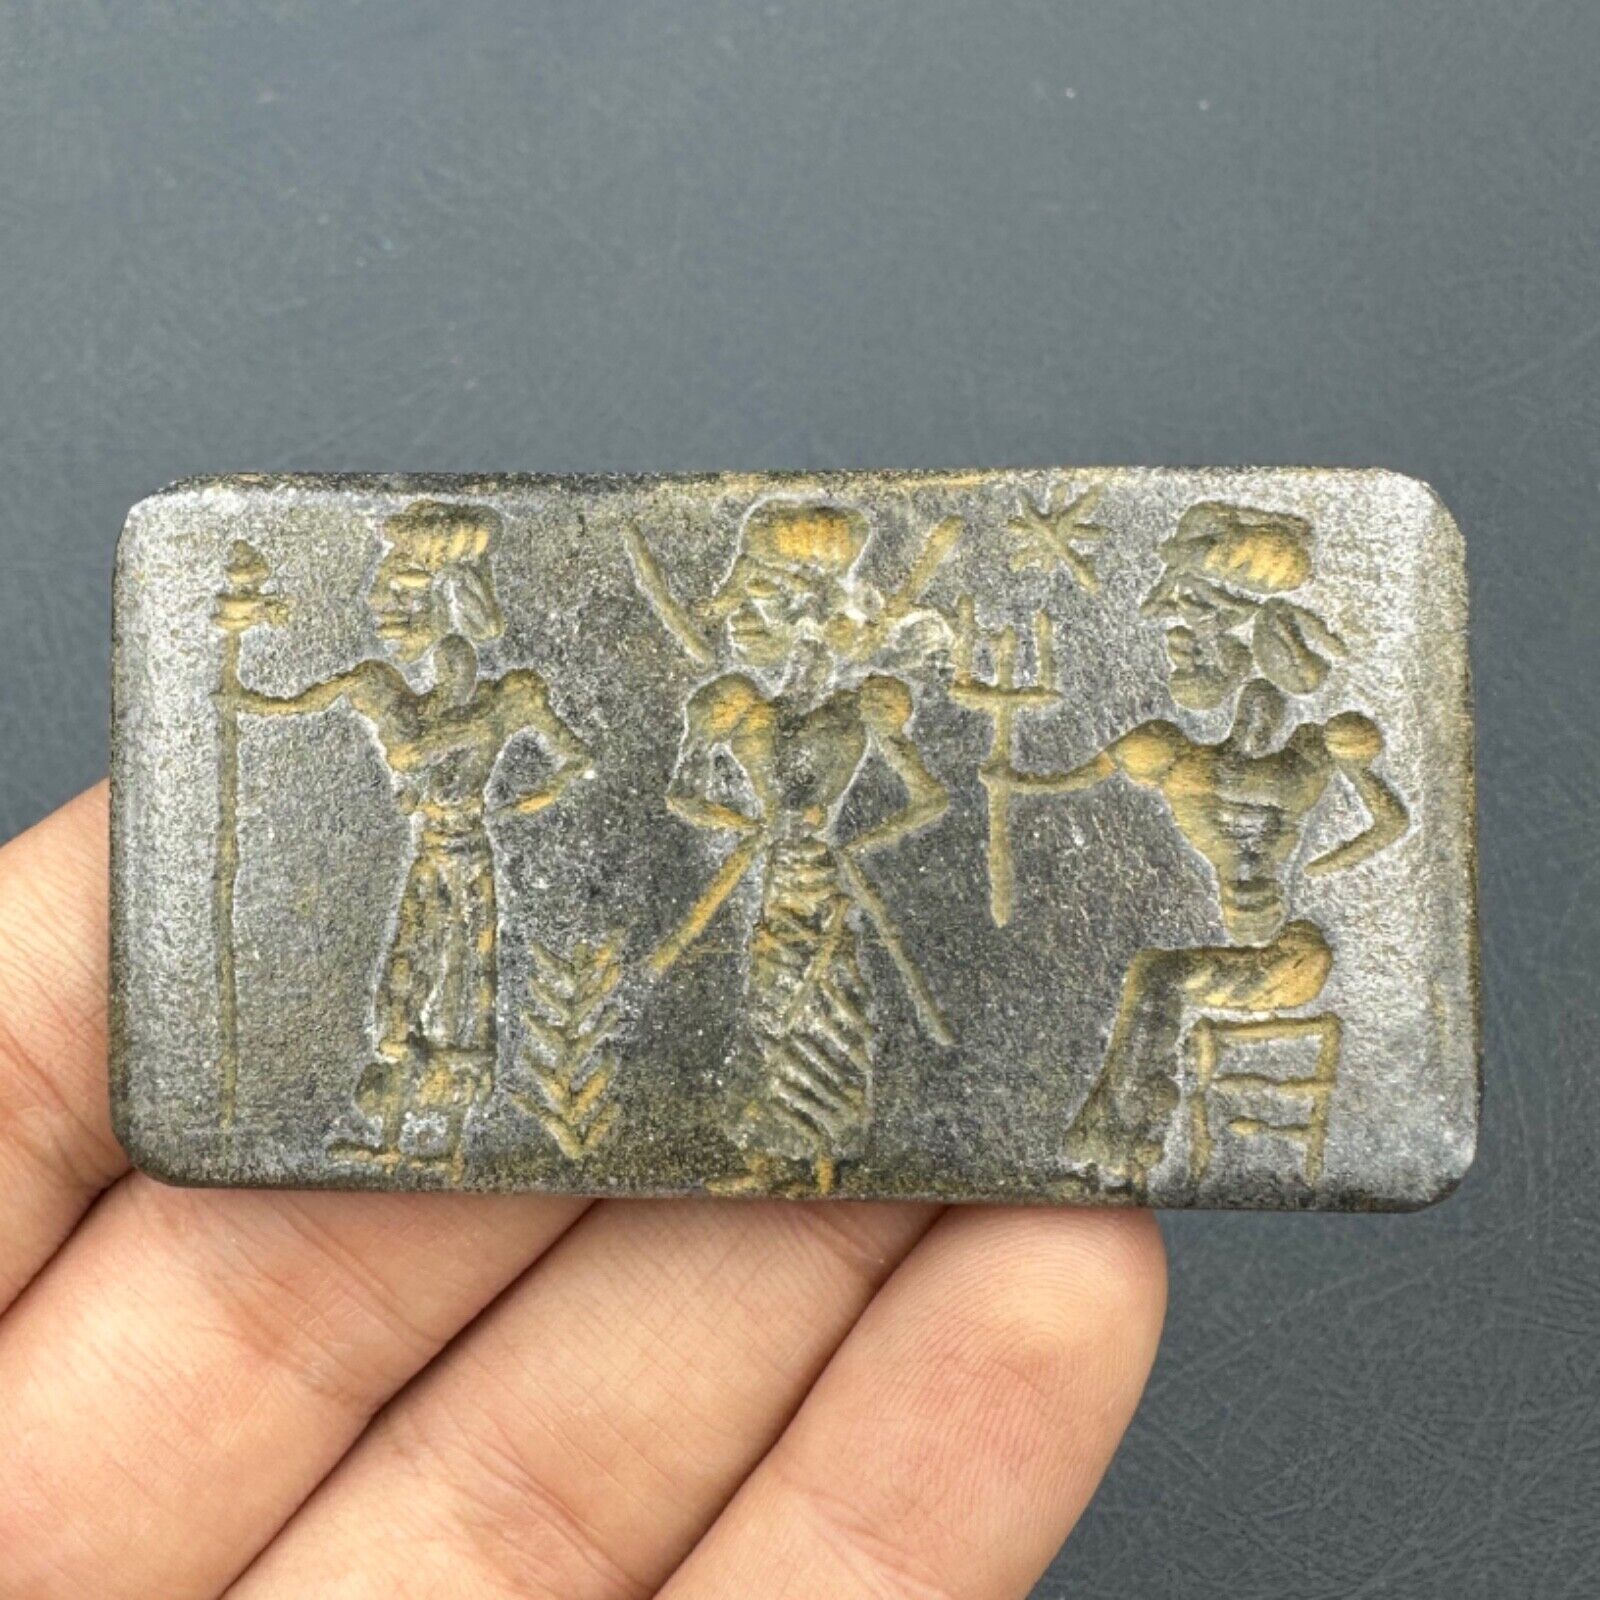 A very old ancient near eastern Sumerian king tablet unique piece